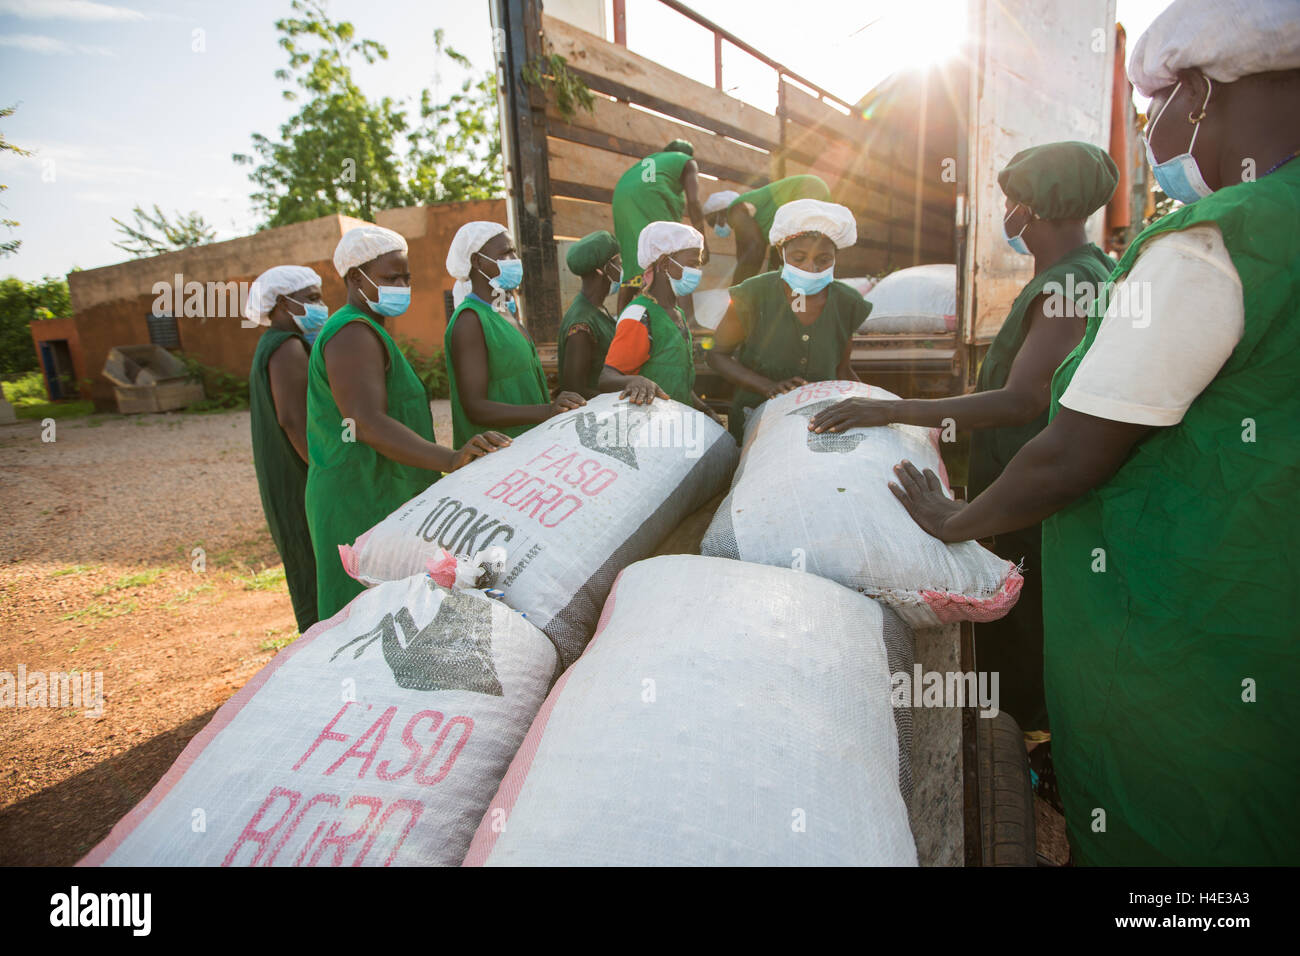 Bags of shea nuts are unloaded at a warehouse for shea butter production in Réo Burkina Faso, West Africa. Stock Photo